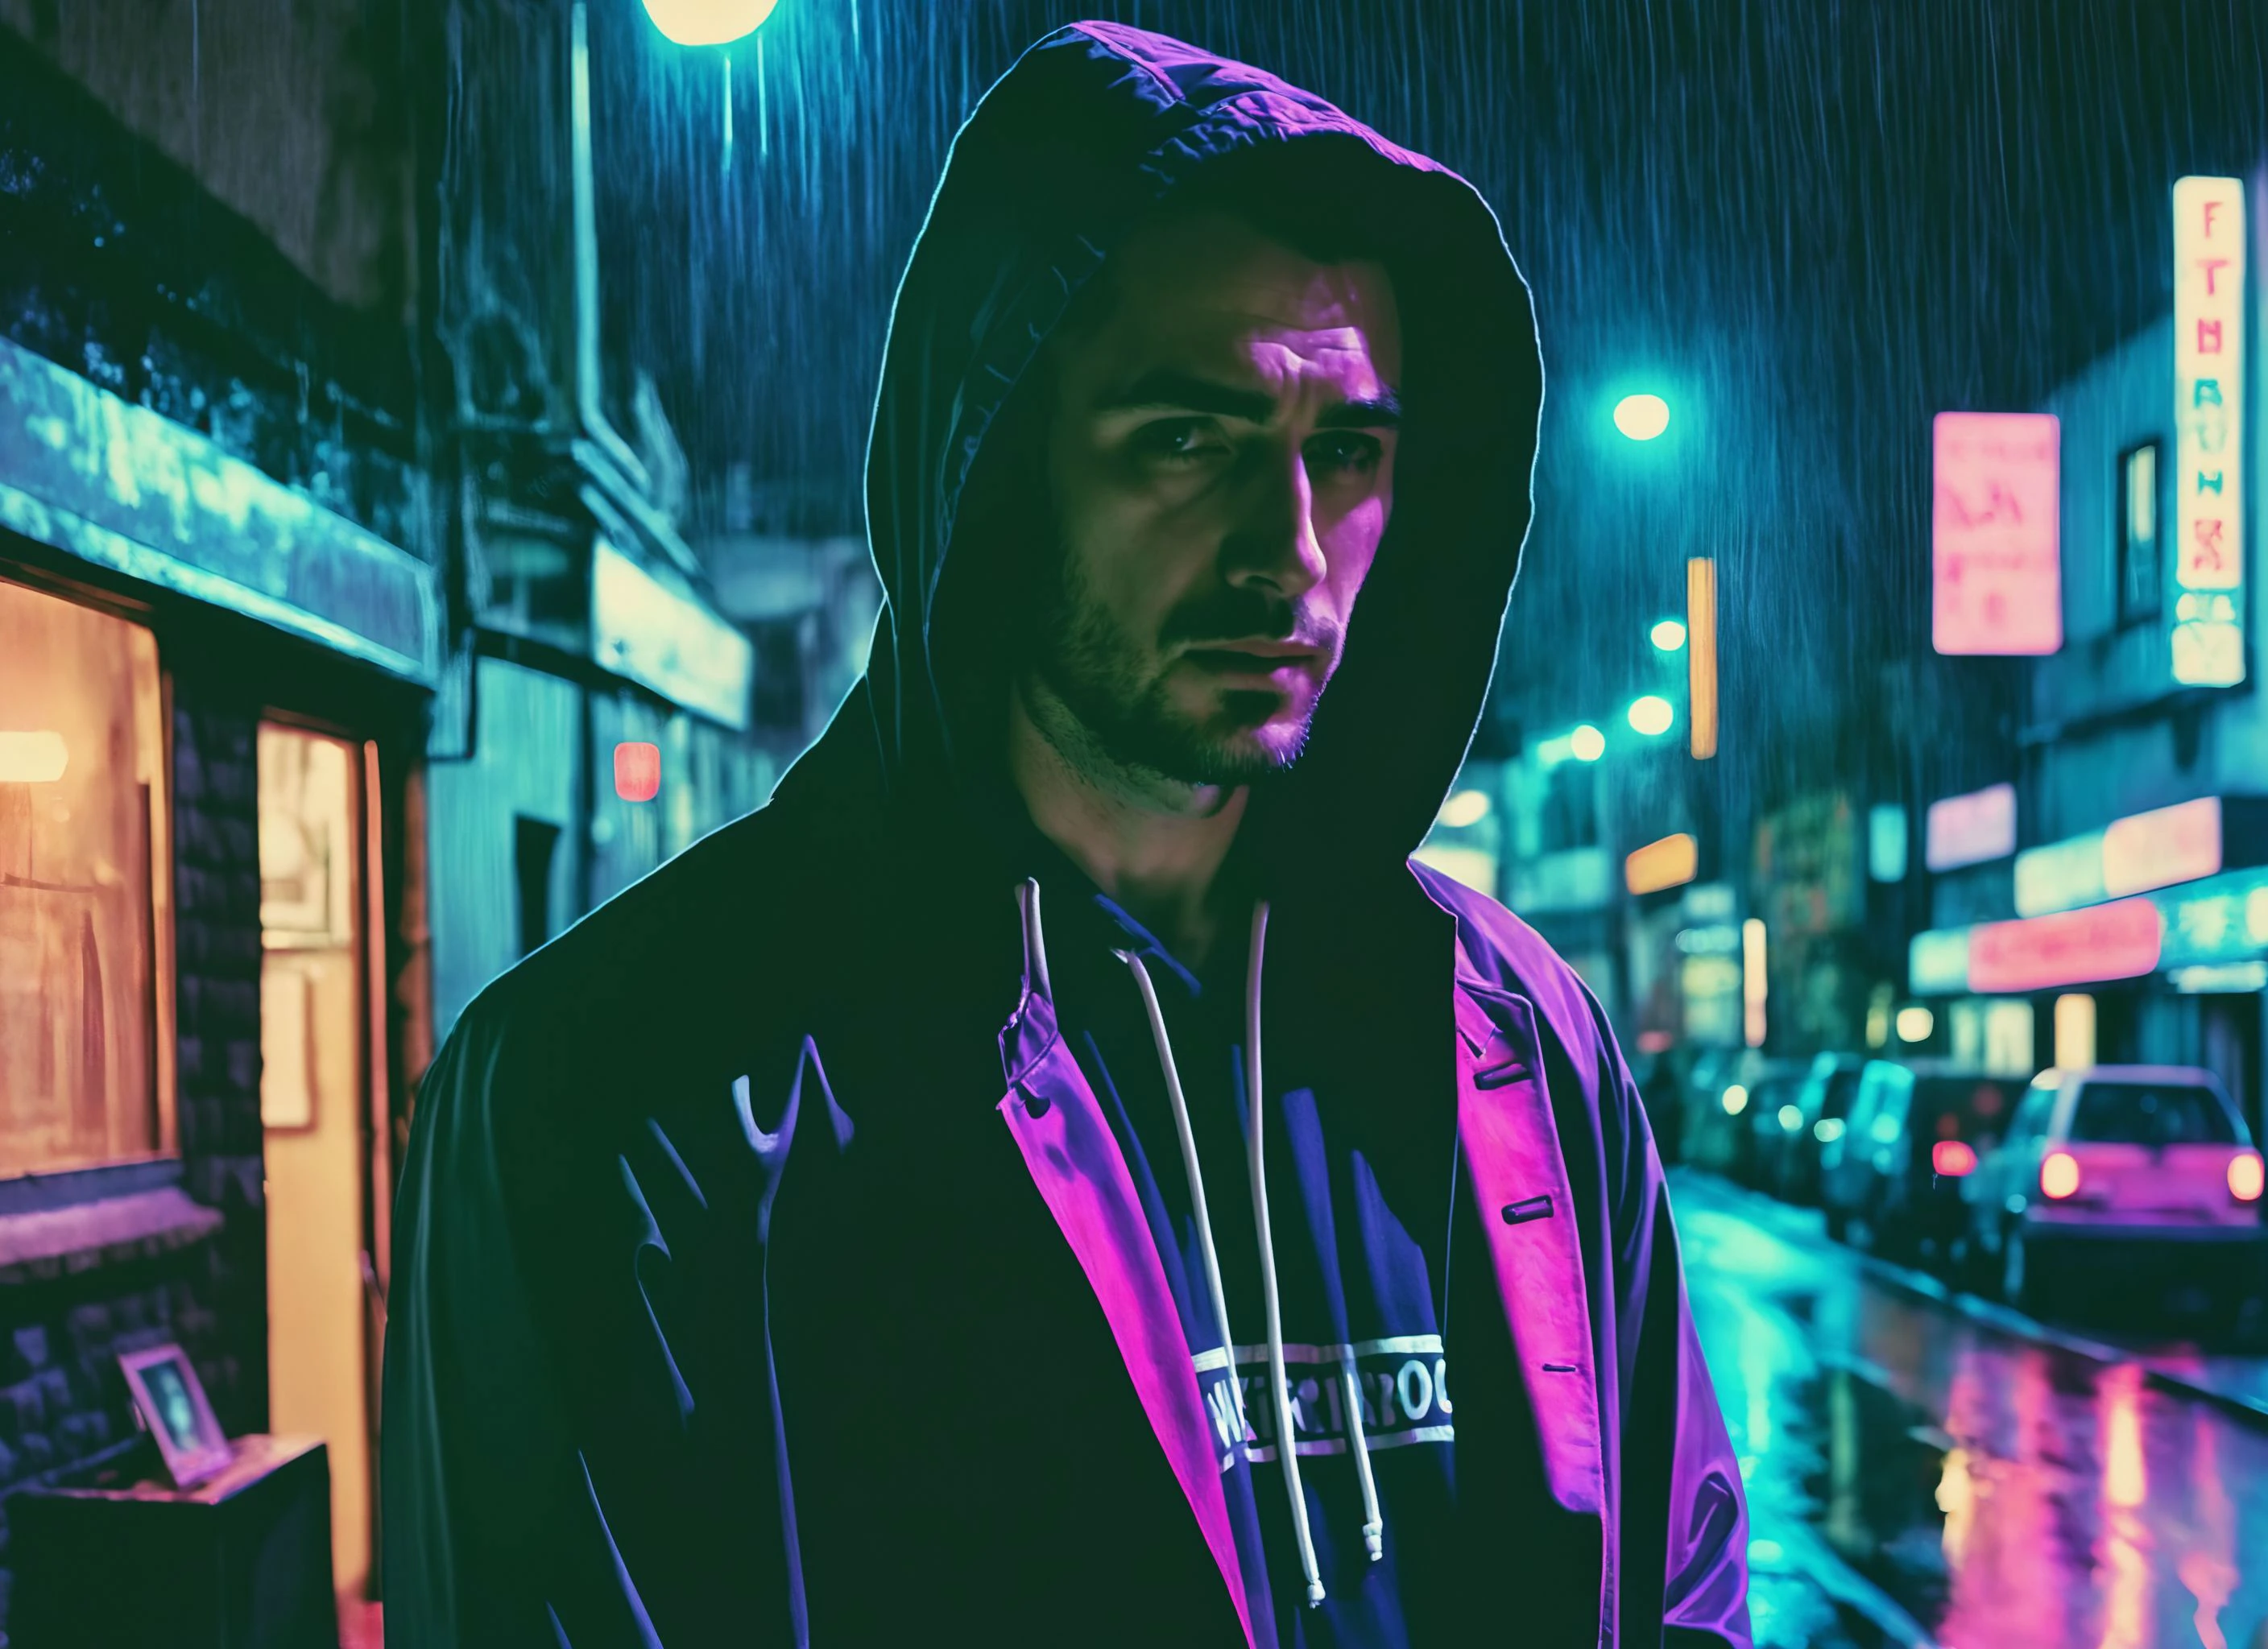 (SONG), nighttime, cyberpunk city, dark, raining, neon lights ((,Wearing a blazer over a hoodie)), blazer, hoodie, (pastel colors ), cyberpunk, synthwave, 1980s, futurism, brutalism, neuromancer, cinematic photo in a backyard, analog, the contrast in colors and textures should be distinct highly detailed, surreal, vibrant yet slightly desaturated, faded film, desaturated, 35mm photo, grainy, vignette, vintage, Kodachrome, Lomography, stained, highly detailed, found footage,Background is stunning 17th century european village scenery, detailed and intricate environment, oil painting, palette knife soft brushstrokes, heavy strokes, dripping paint, art station on trend, sharp focus, intricate details, highly detailed,art by Adrian Tomine